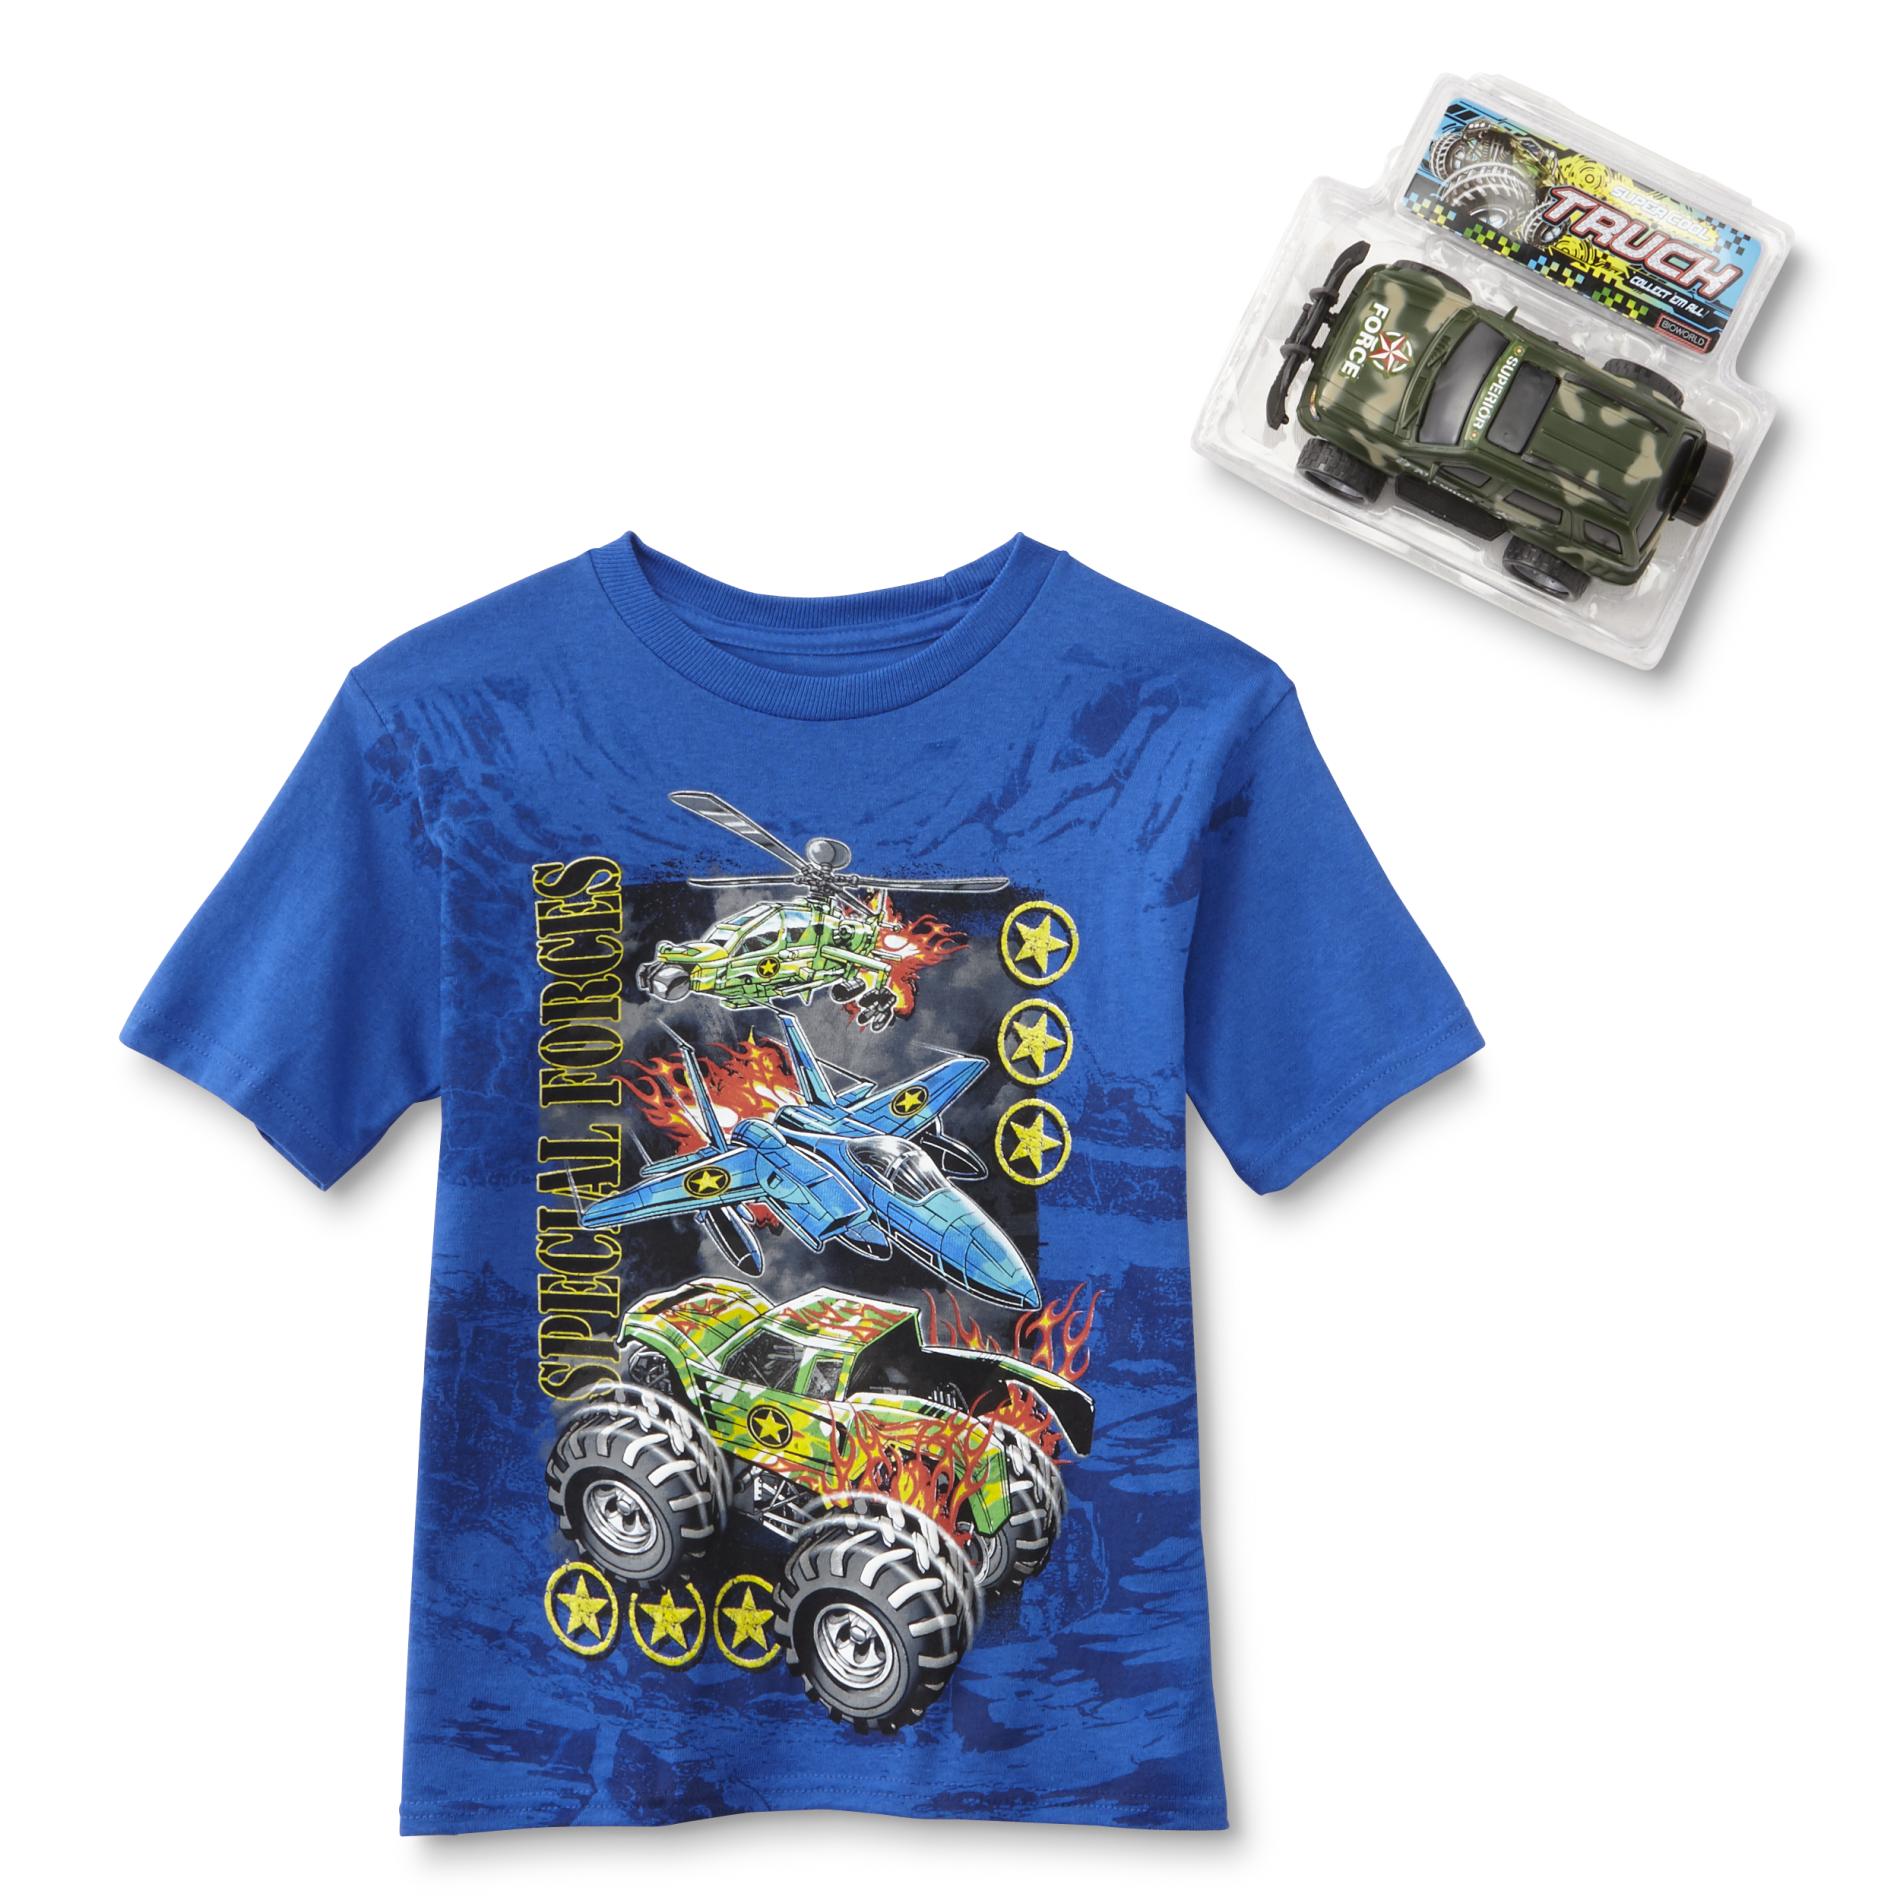 Boy's Graphic T-Shirt & Toy - Special Forces